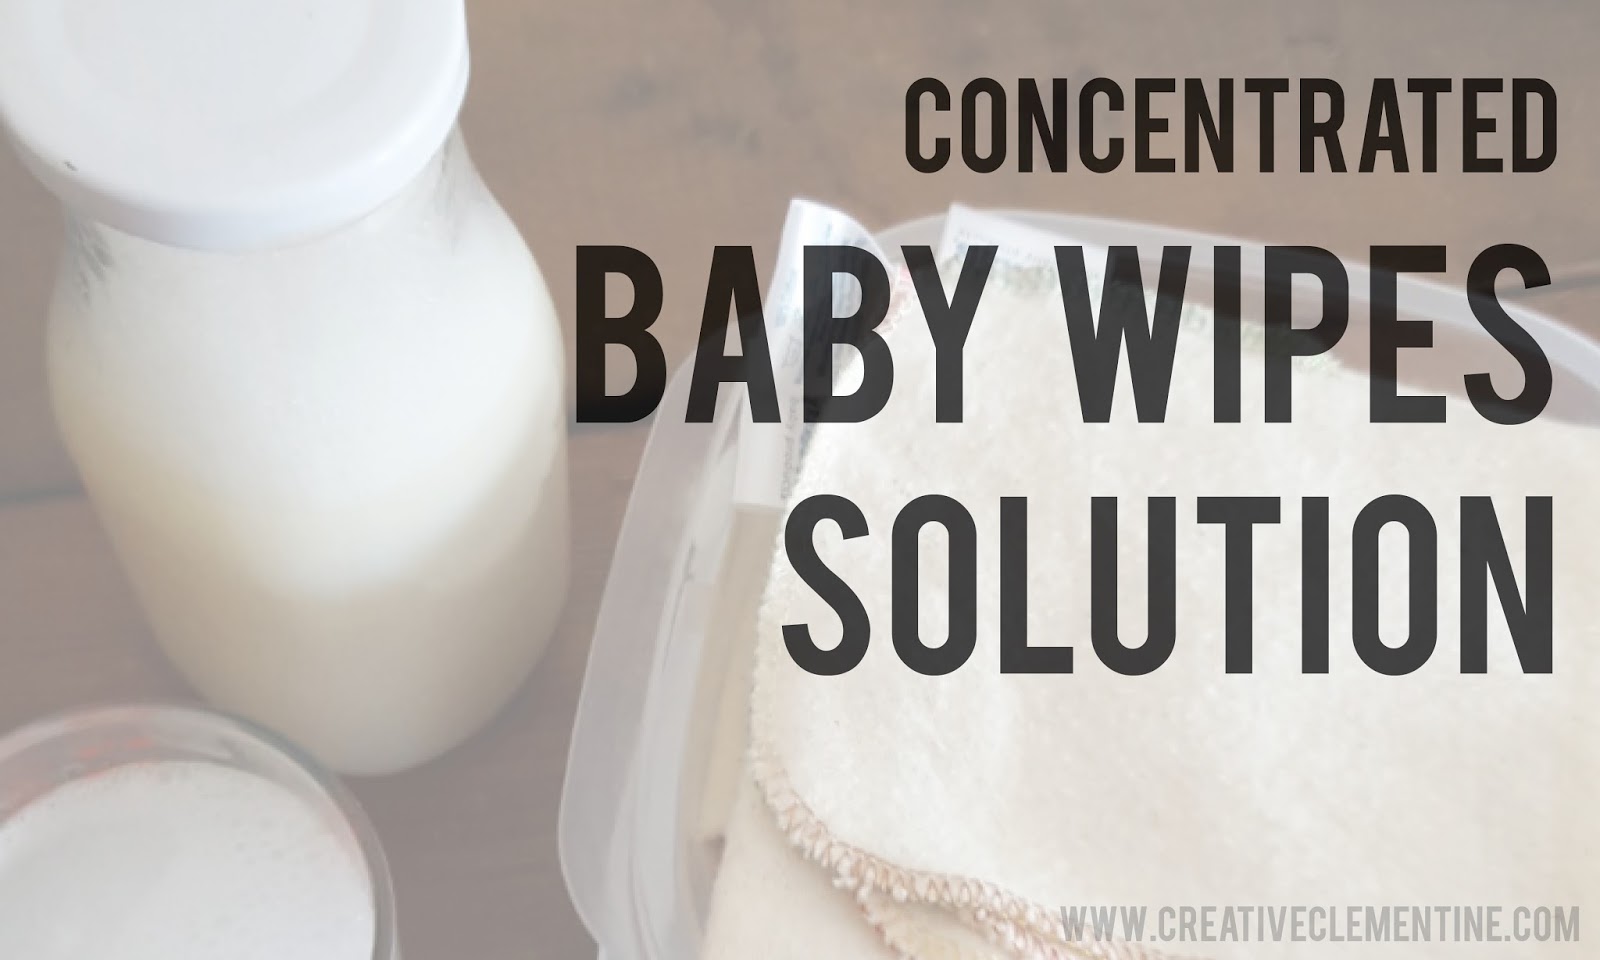 An easy recipe for homemade cloth baby wipes cleansing solution, via www.creativeclementine.com